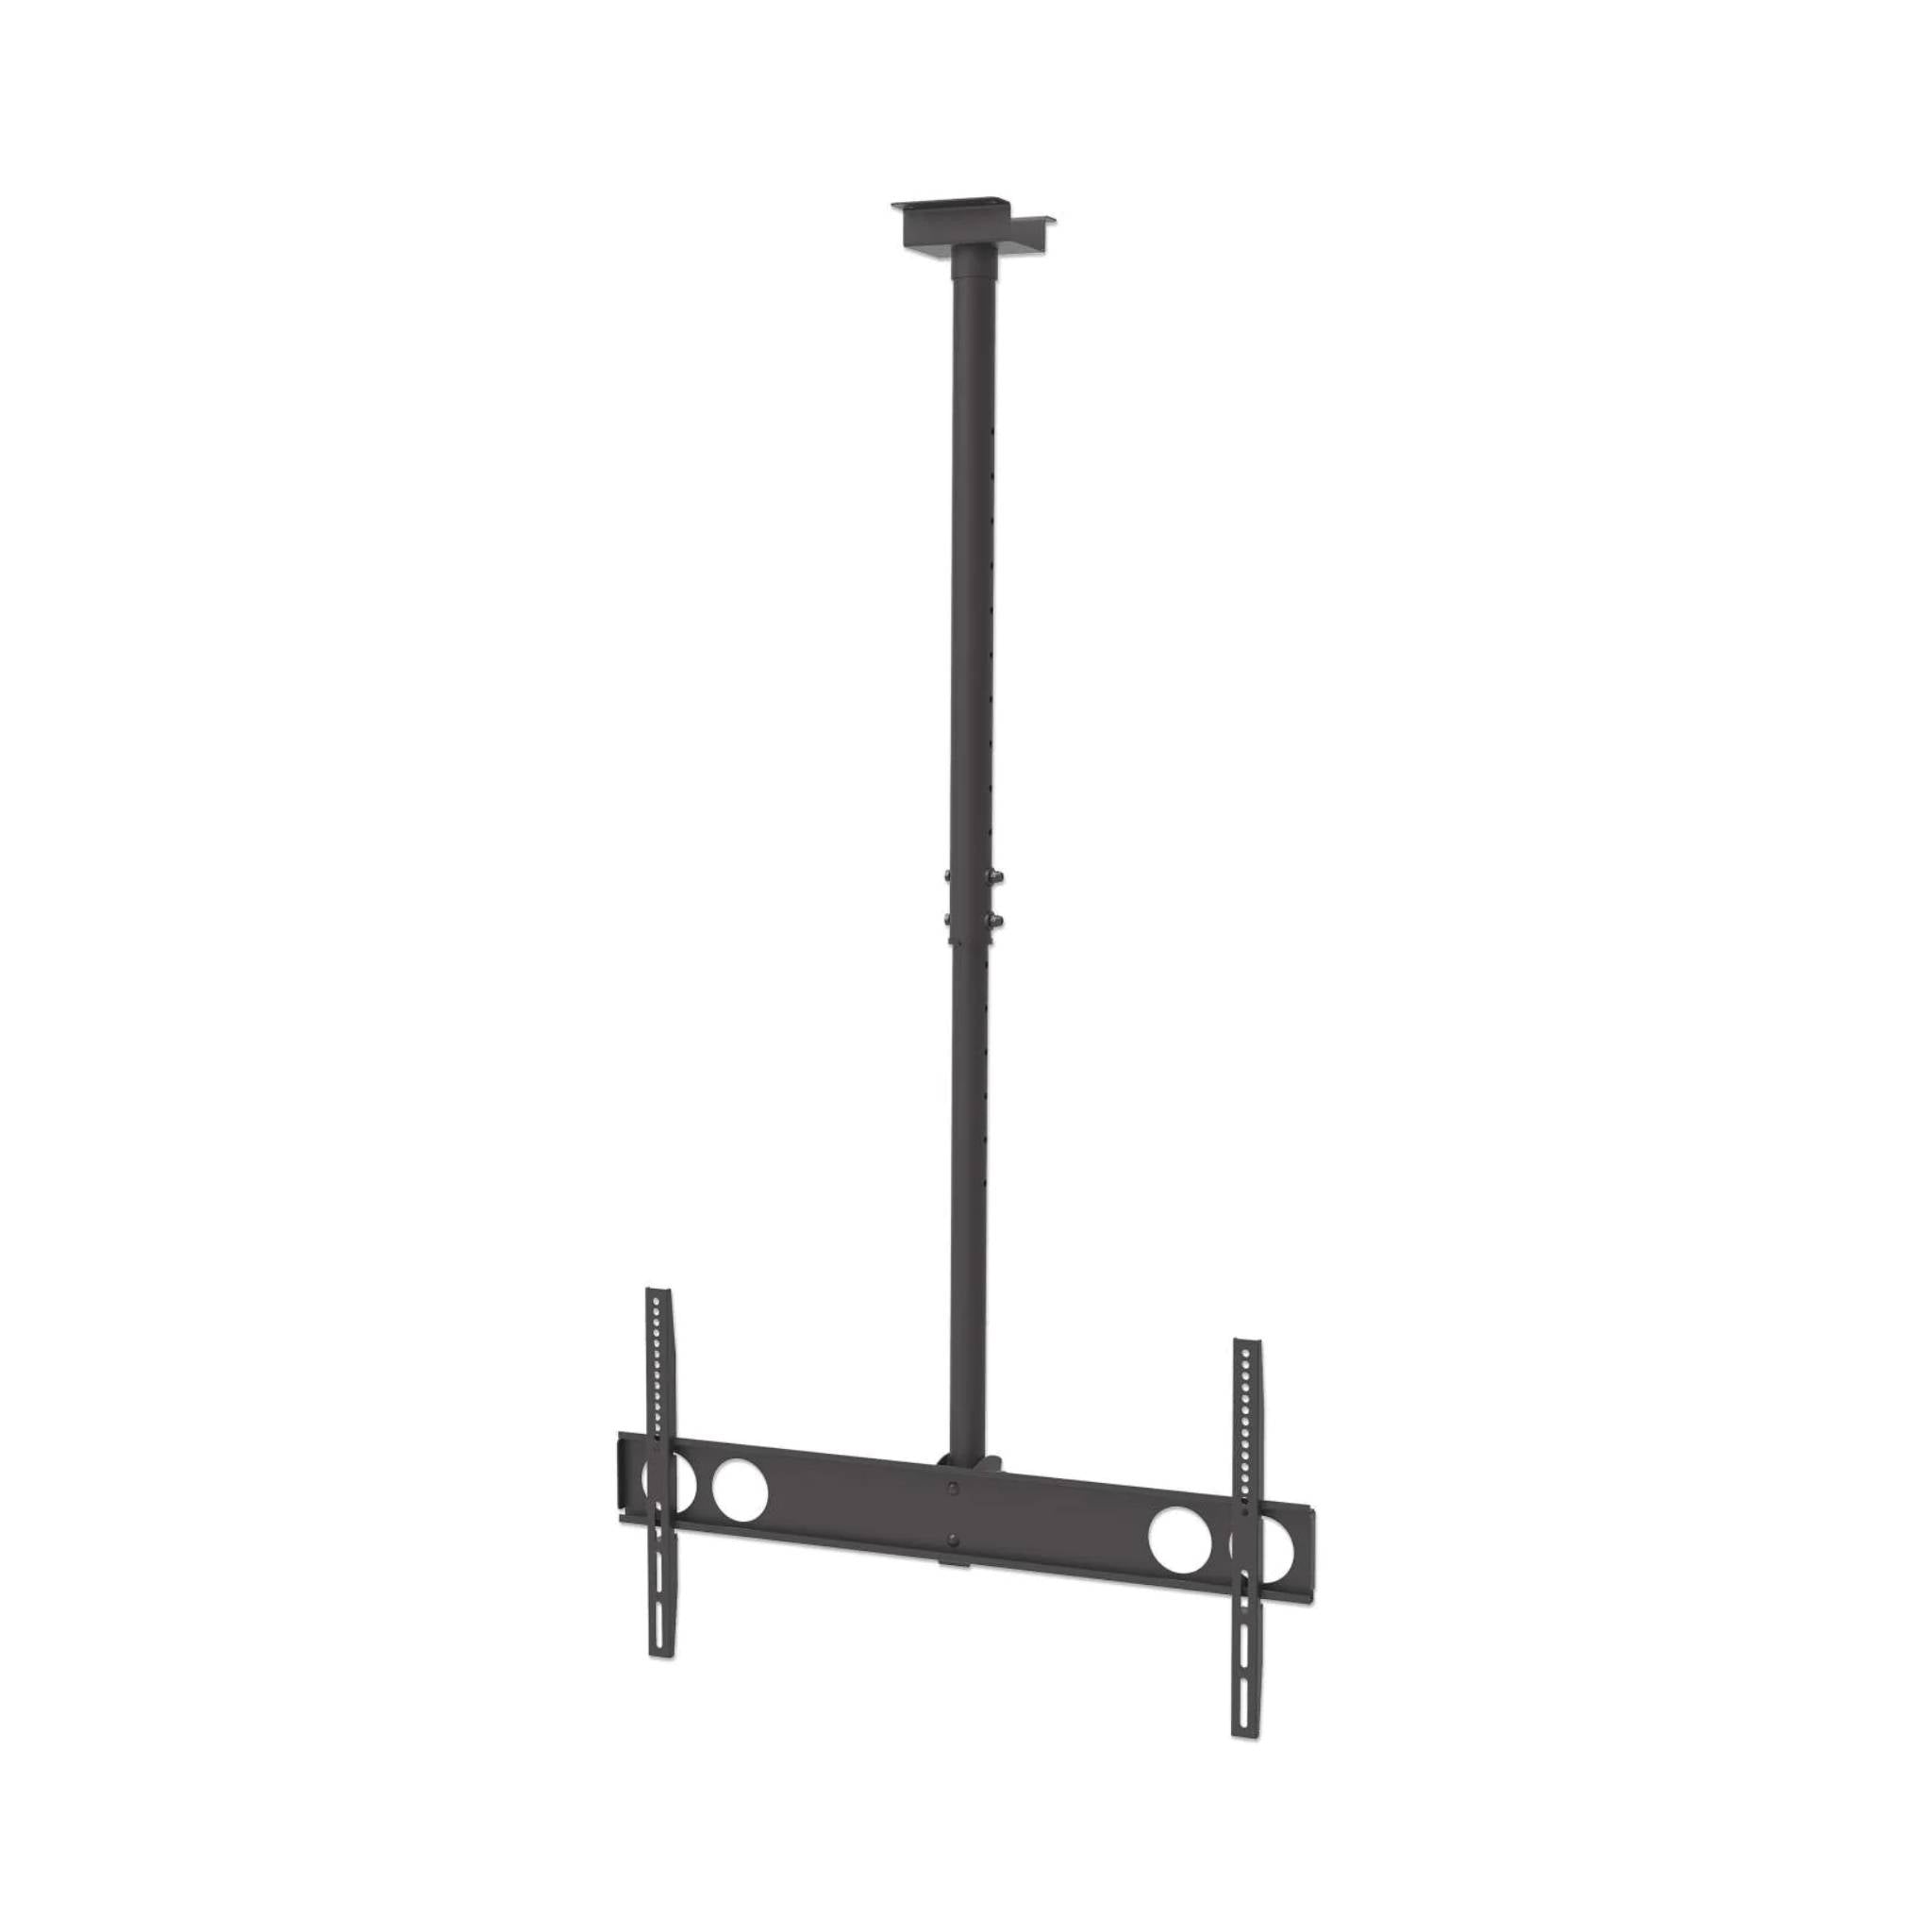 "Premium TV Ceiling Mount for 37-70" TVs with Tilt and 360-Degree Rotation - Supports Up to 110lbs"